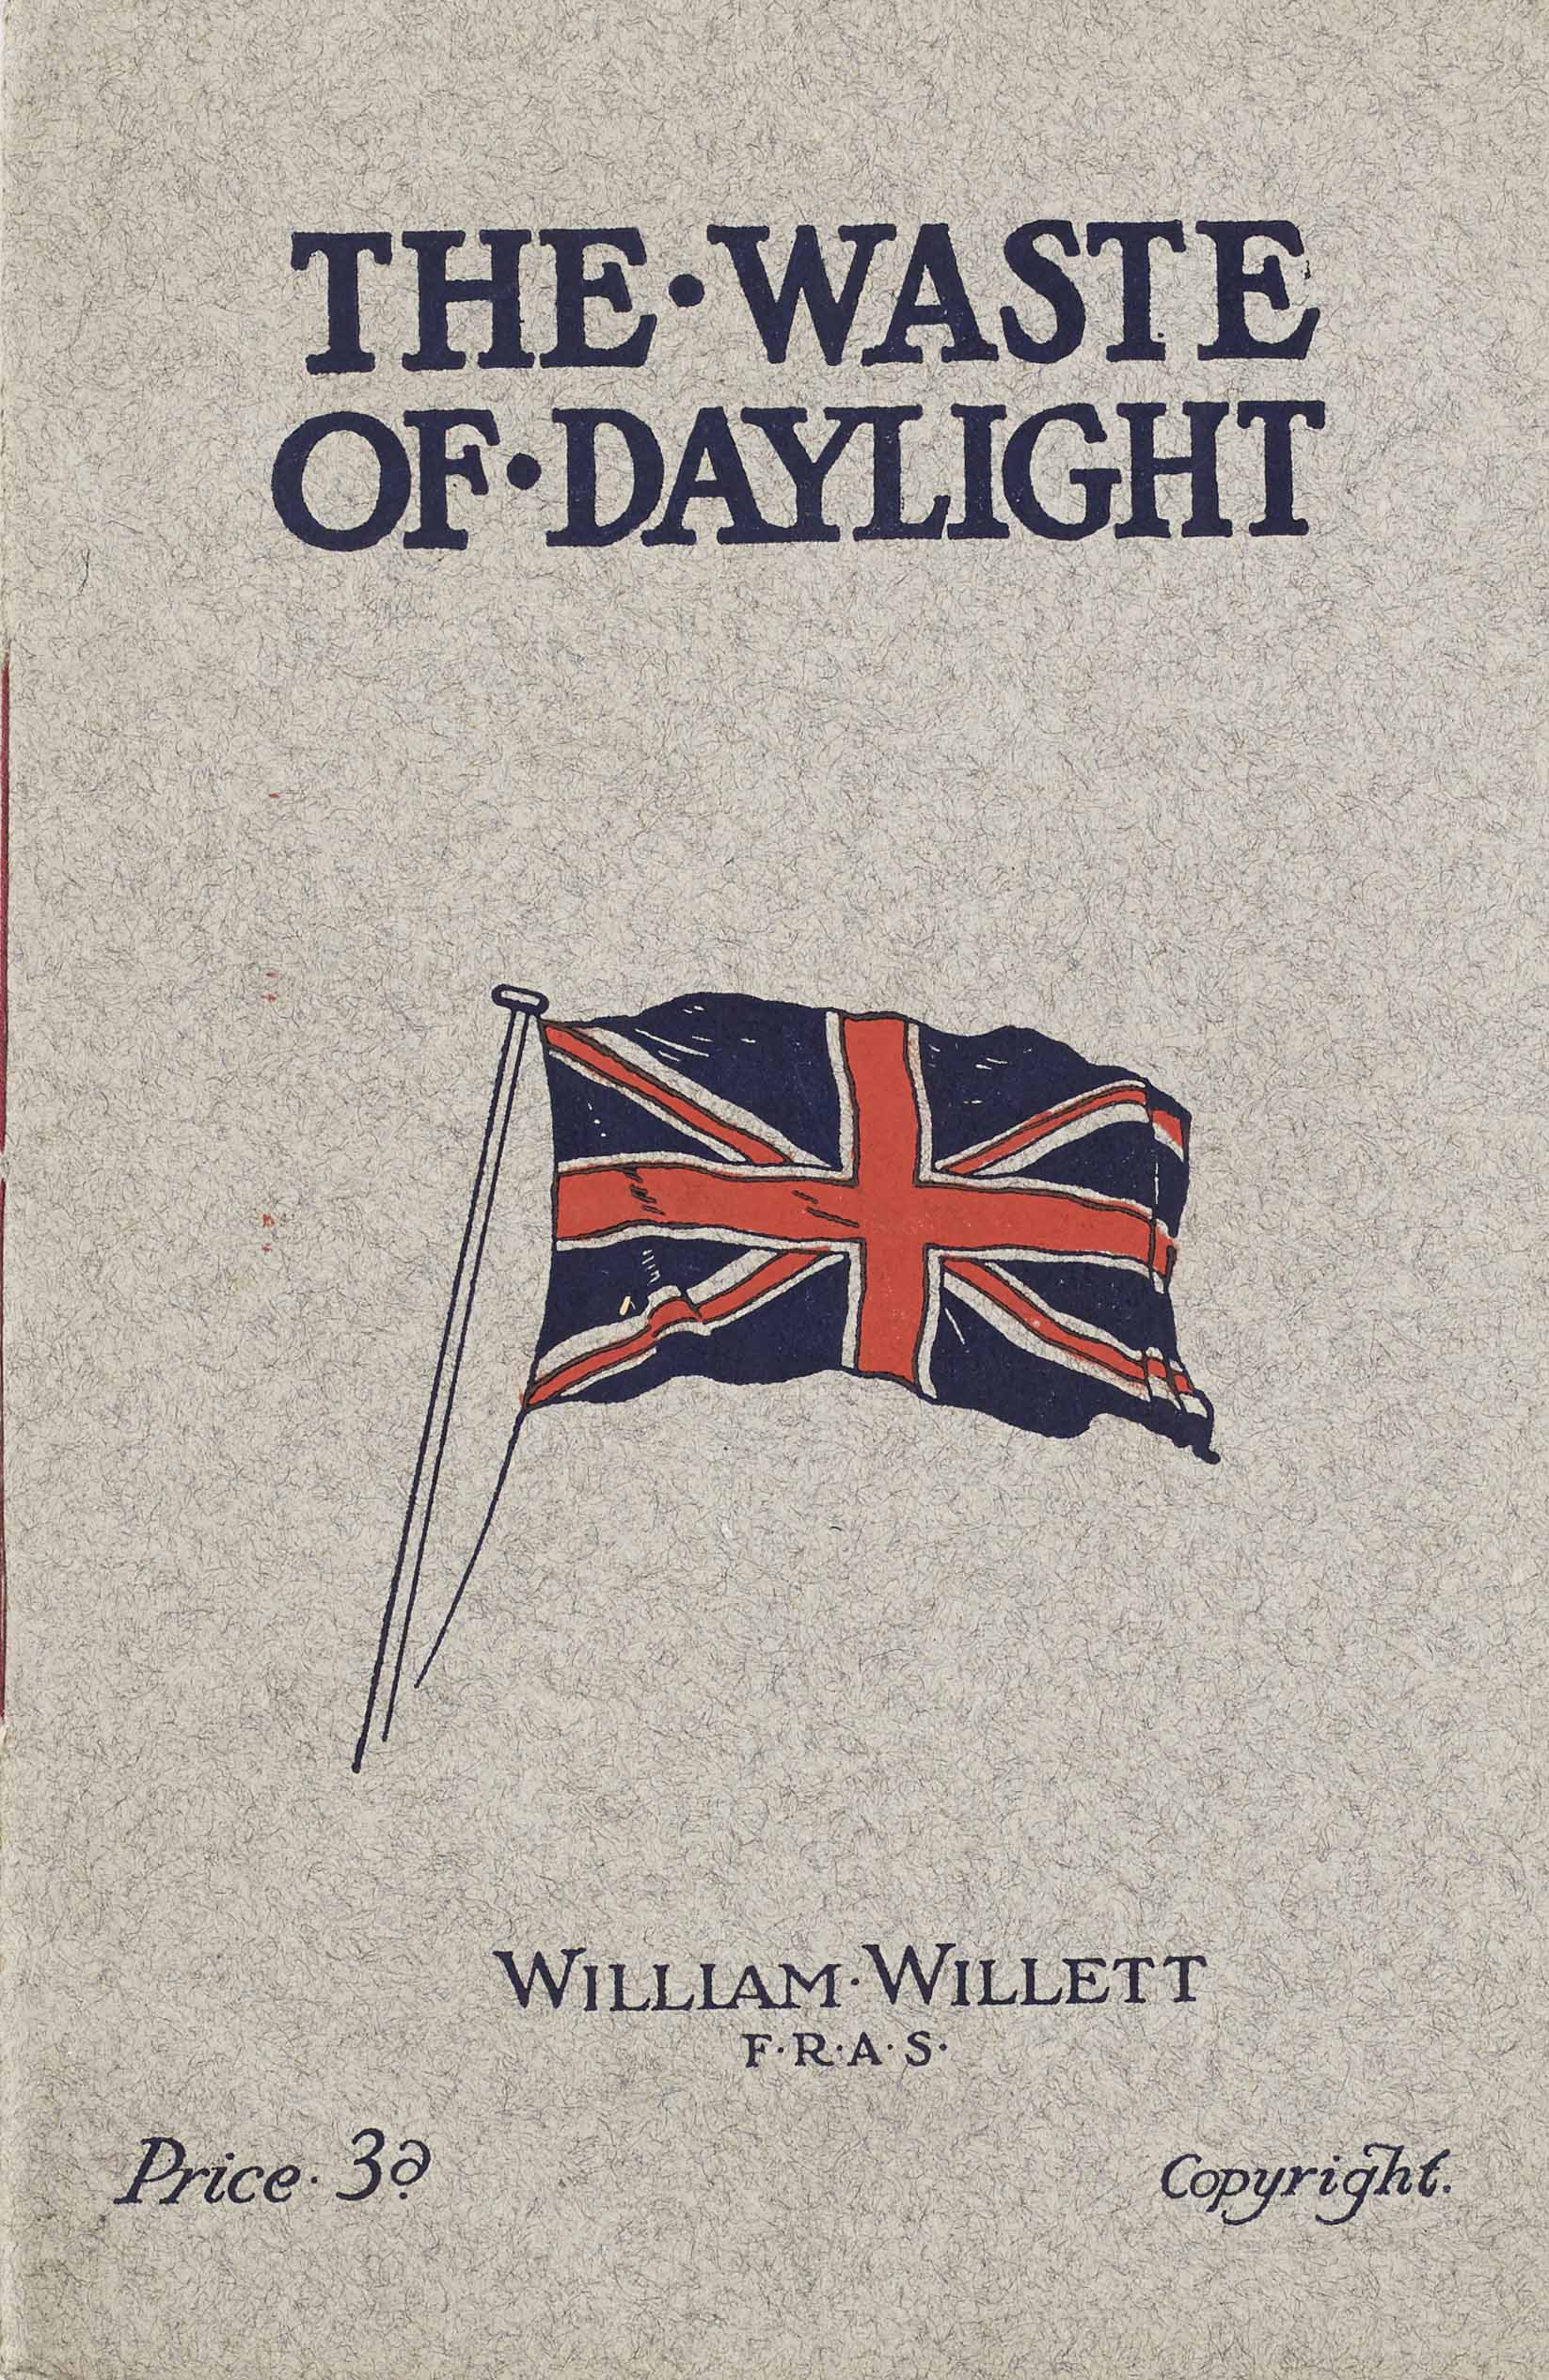 Front cover of “Daylight Saving Bill” pamphlet. Builder William Willett made the case for Daylight Saving in 1909, and it was implemented in the UK 1916 – we have been changing our clocks each spring and autumn ever since. From the Whitby Museum Manuscripts collection.